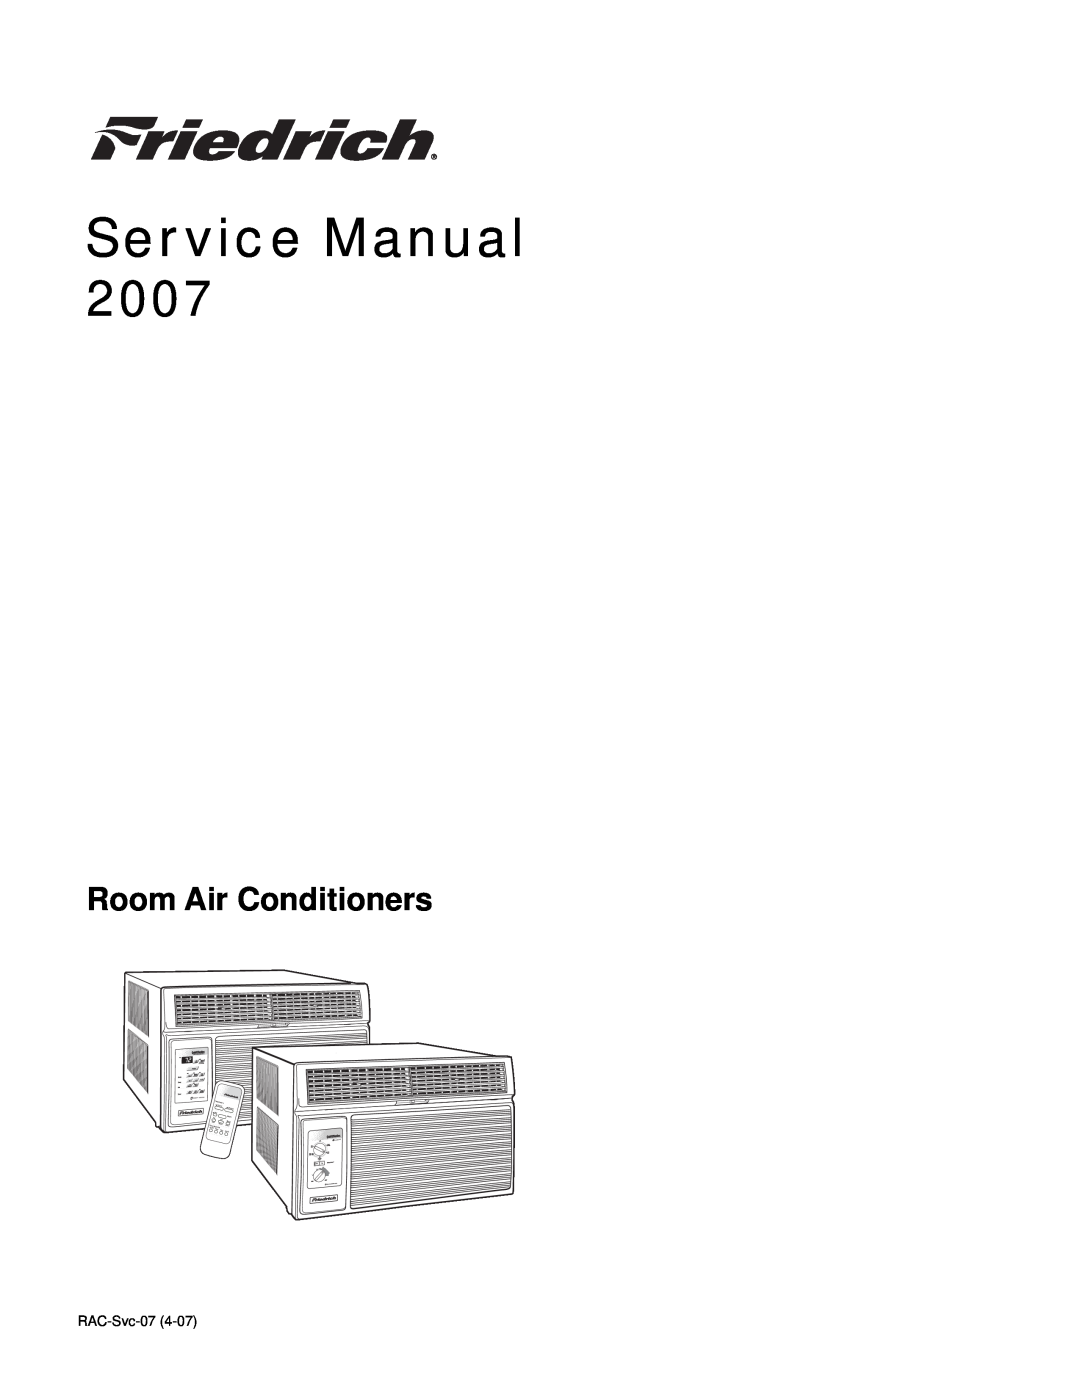 Friedrich 2007 service manual Room Air Conditioners, Temperature, Timer, Power, Cooler Warmer Cool, Only, Speed, Start 